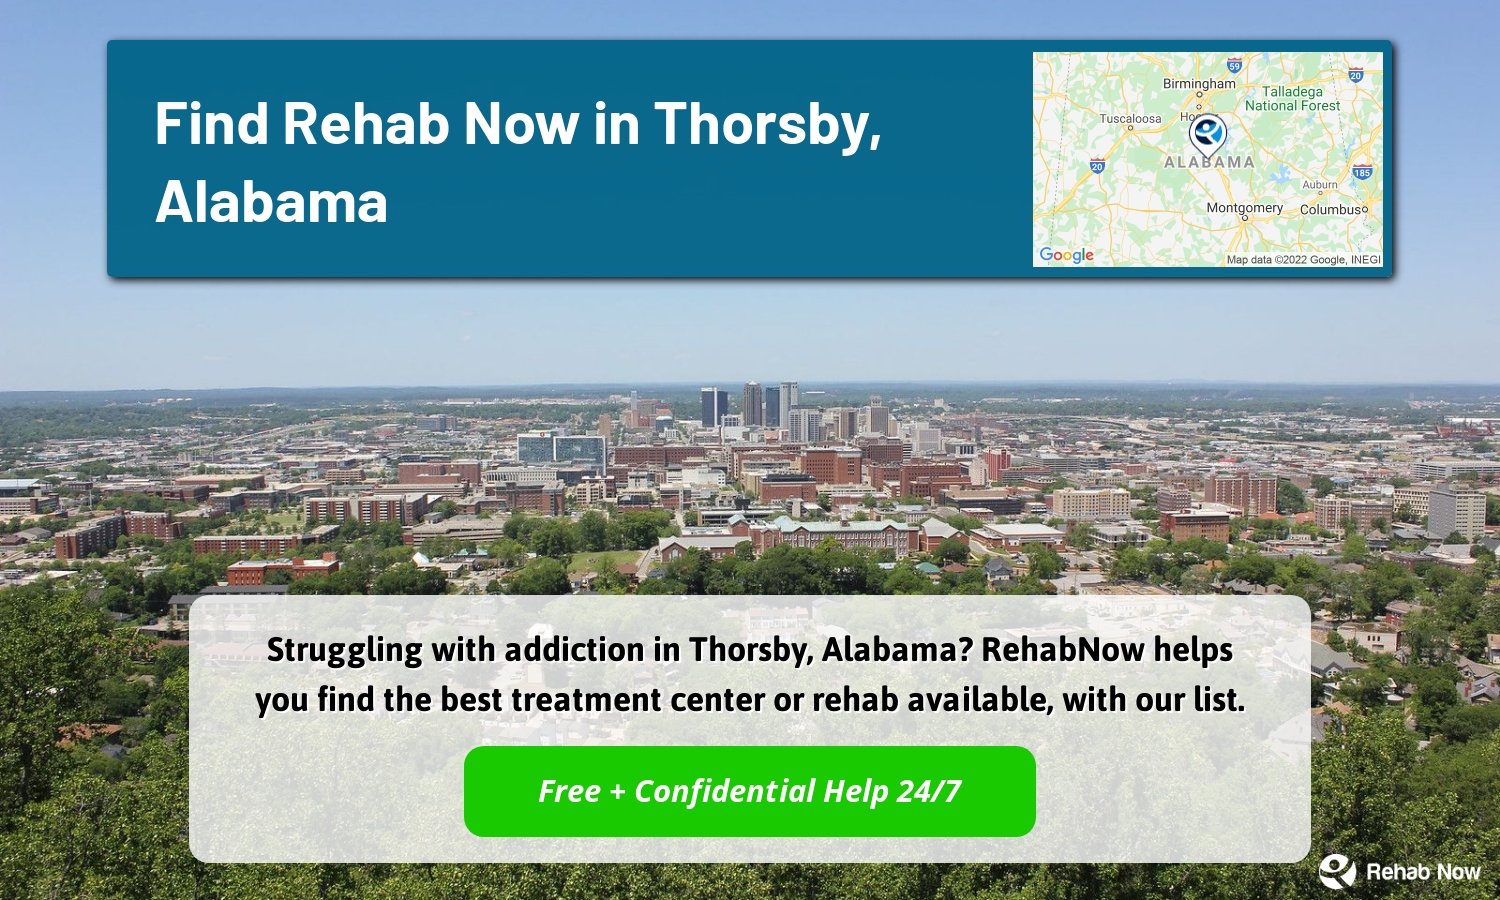 Struggling with addiction in Thorsby, Alabama? RehabNow helps you find the best treatment center or rehab available, with our list.